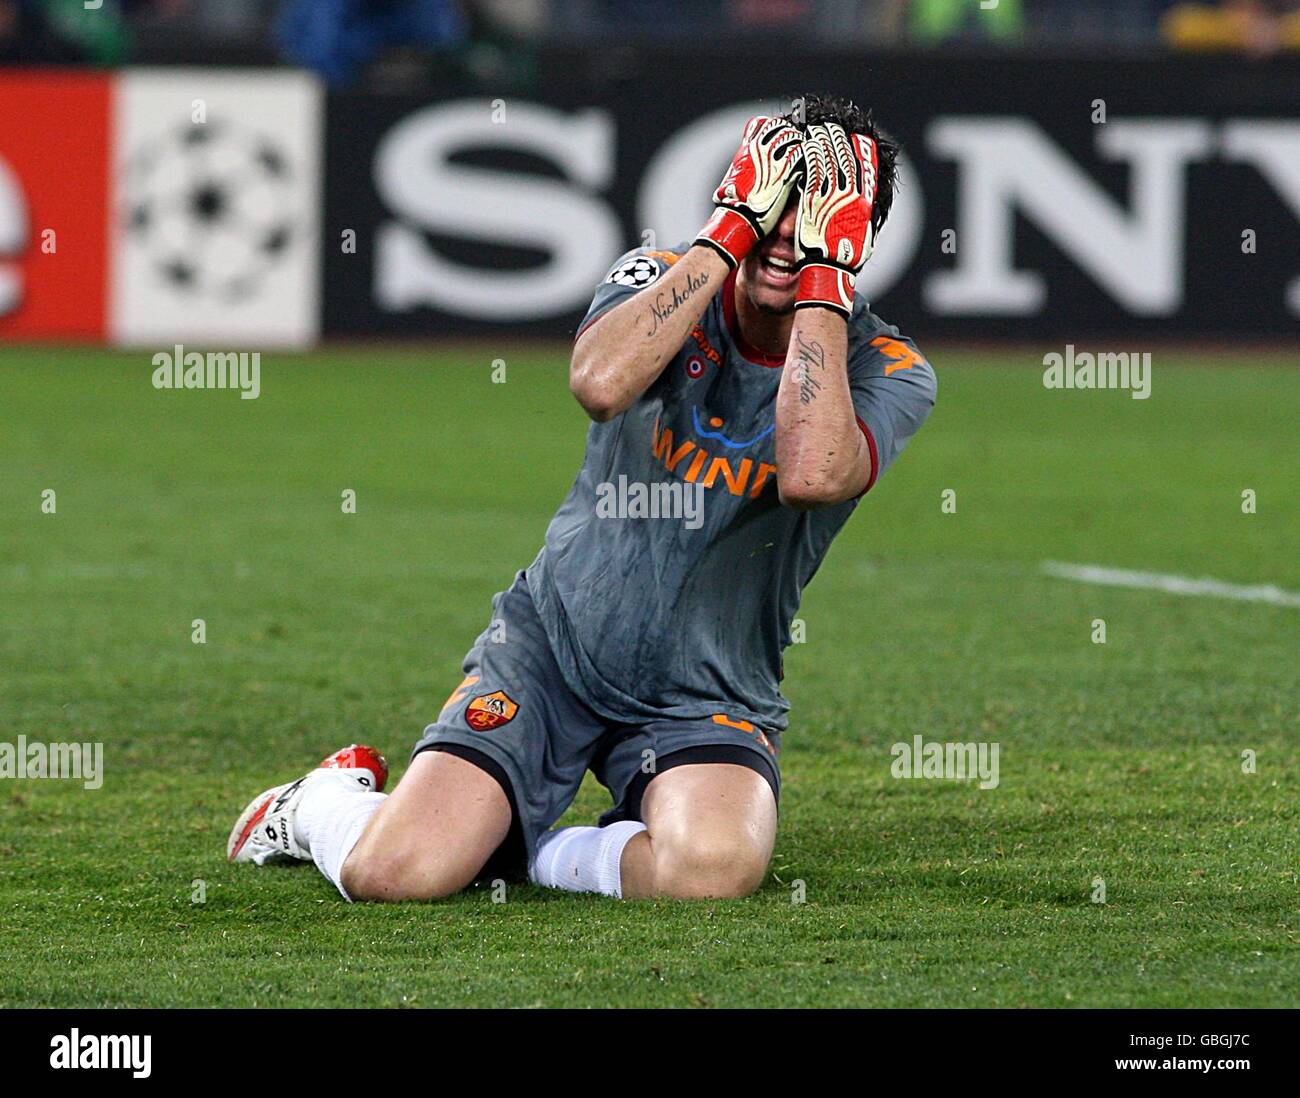 Soccer - UEFA Champions League - First Knockout Round - Second Leg - Roma v Arsenal - Stadio Olimpico. Roma's goalkeeper Alexander Doni reacts after Arsenal's Theo Walcott scores during the penalty shootout Stock Photo